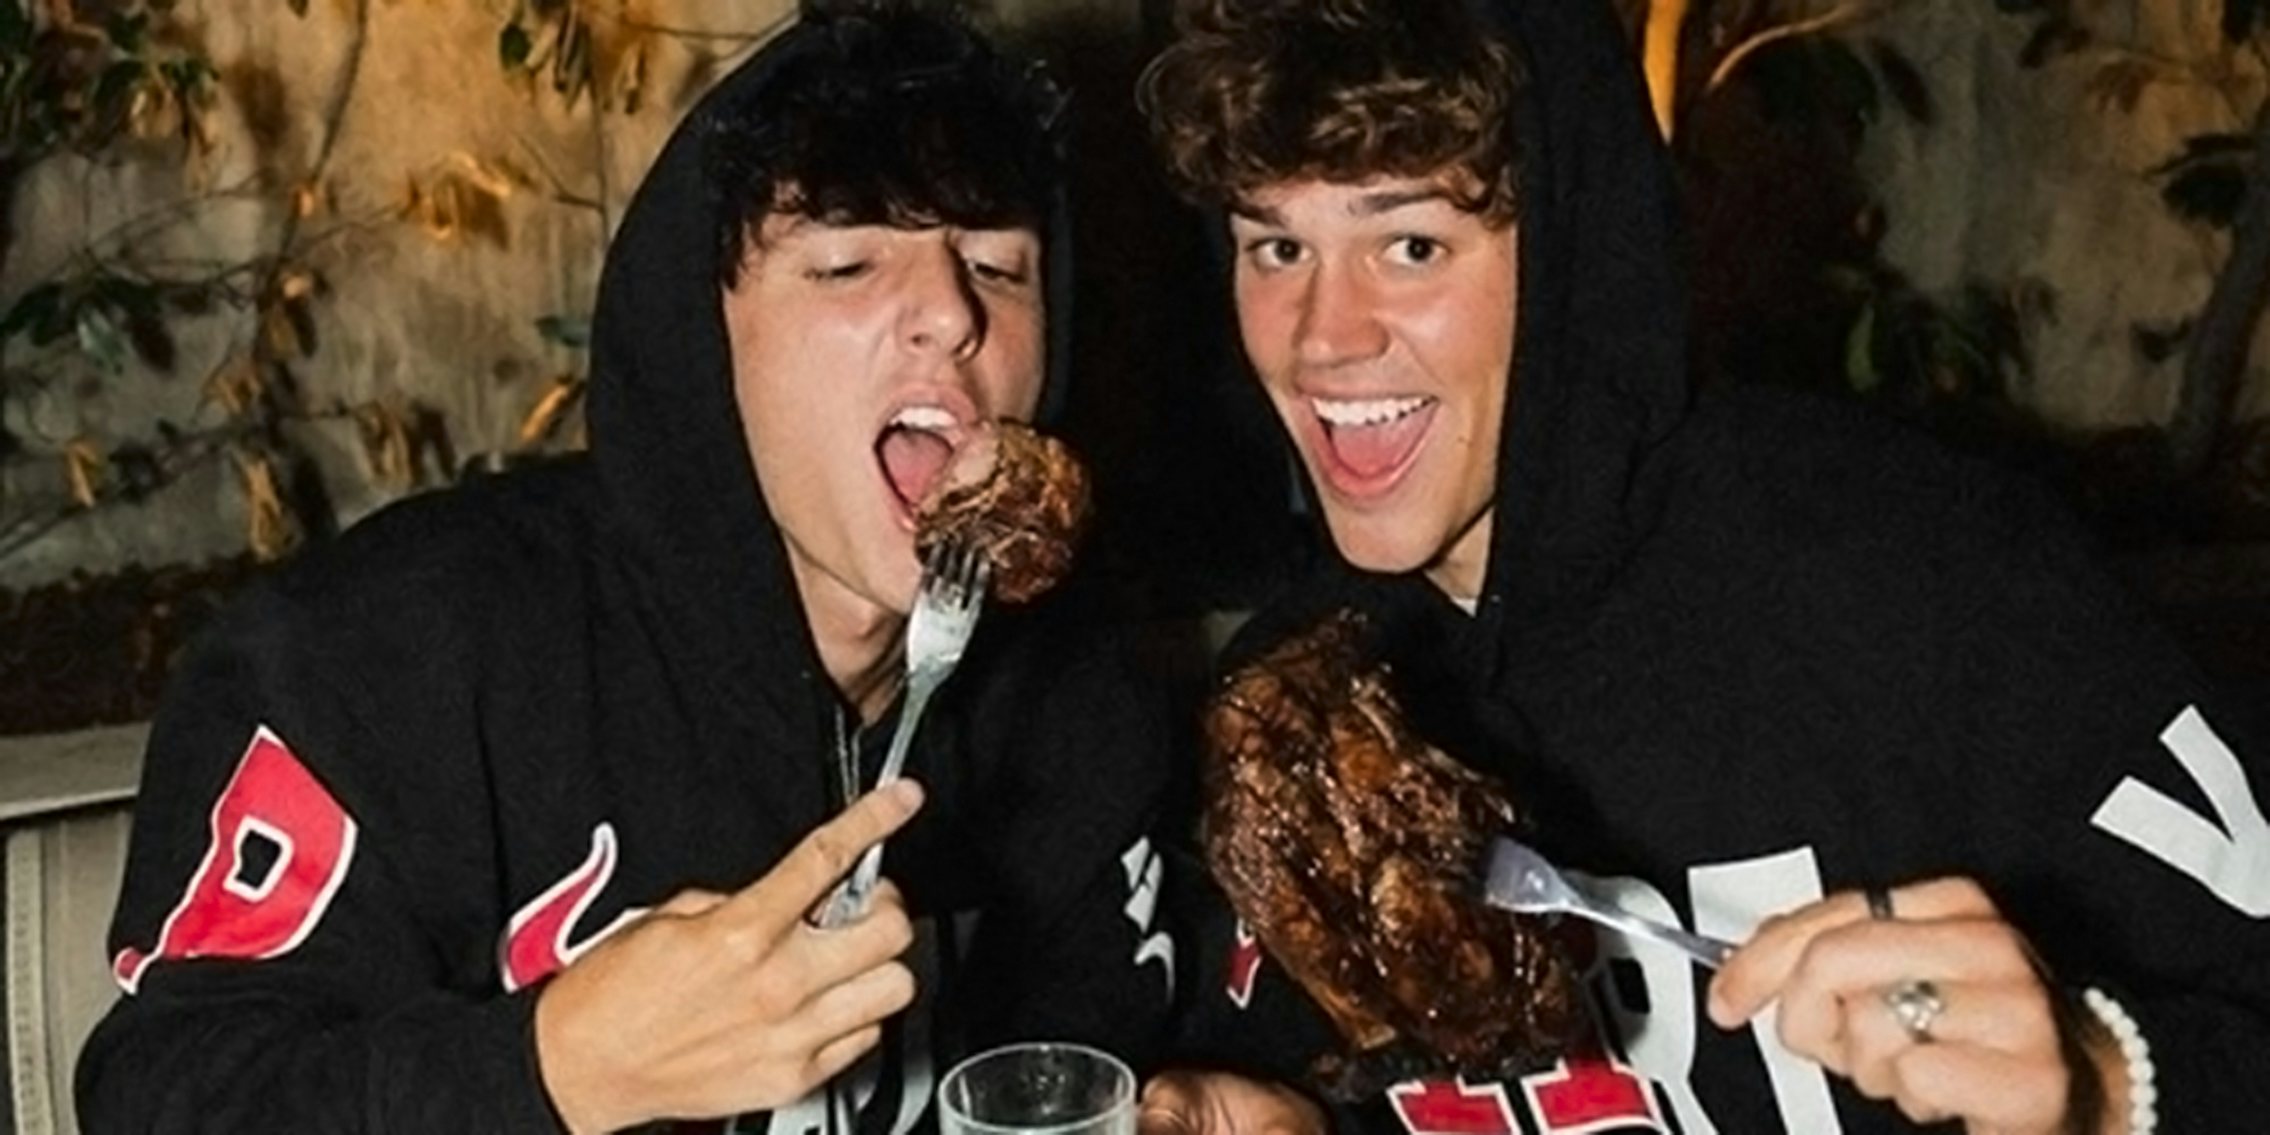 two instagram users eat steak during pandemic